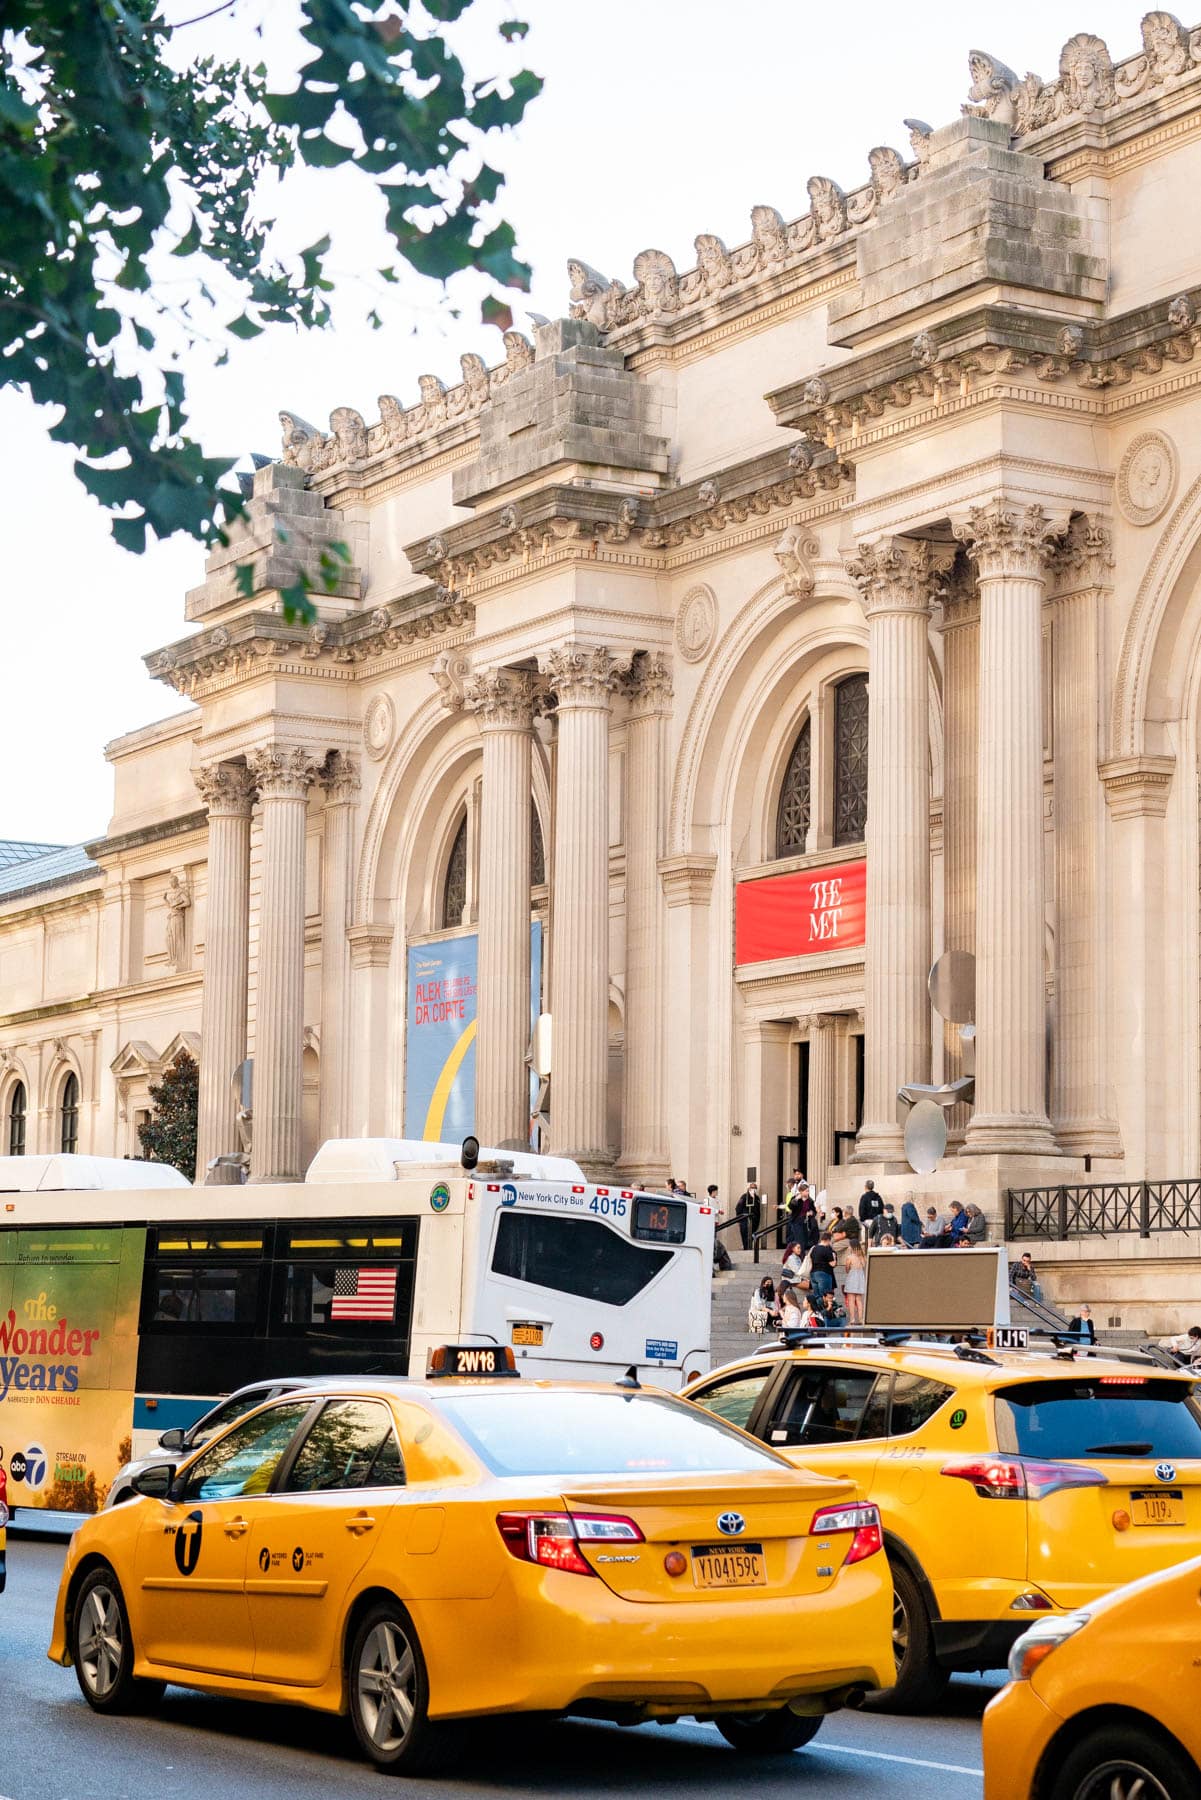 Best things to see at the MET museums in New York City